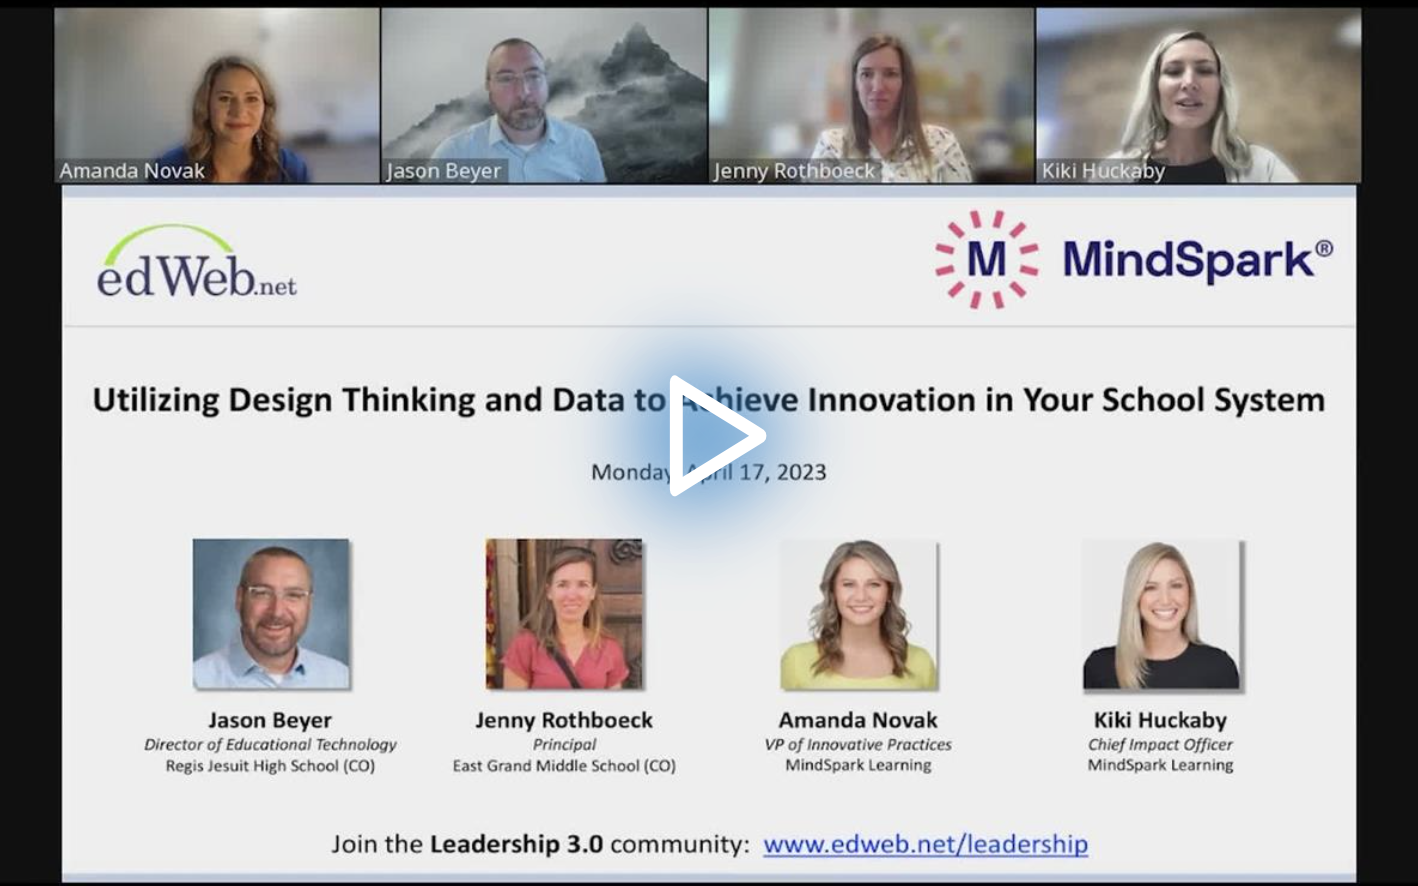 Utilizing Design Thinking and Data to Achieve Innovation in Your School System edLeader Panel recording screenshot